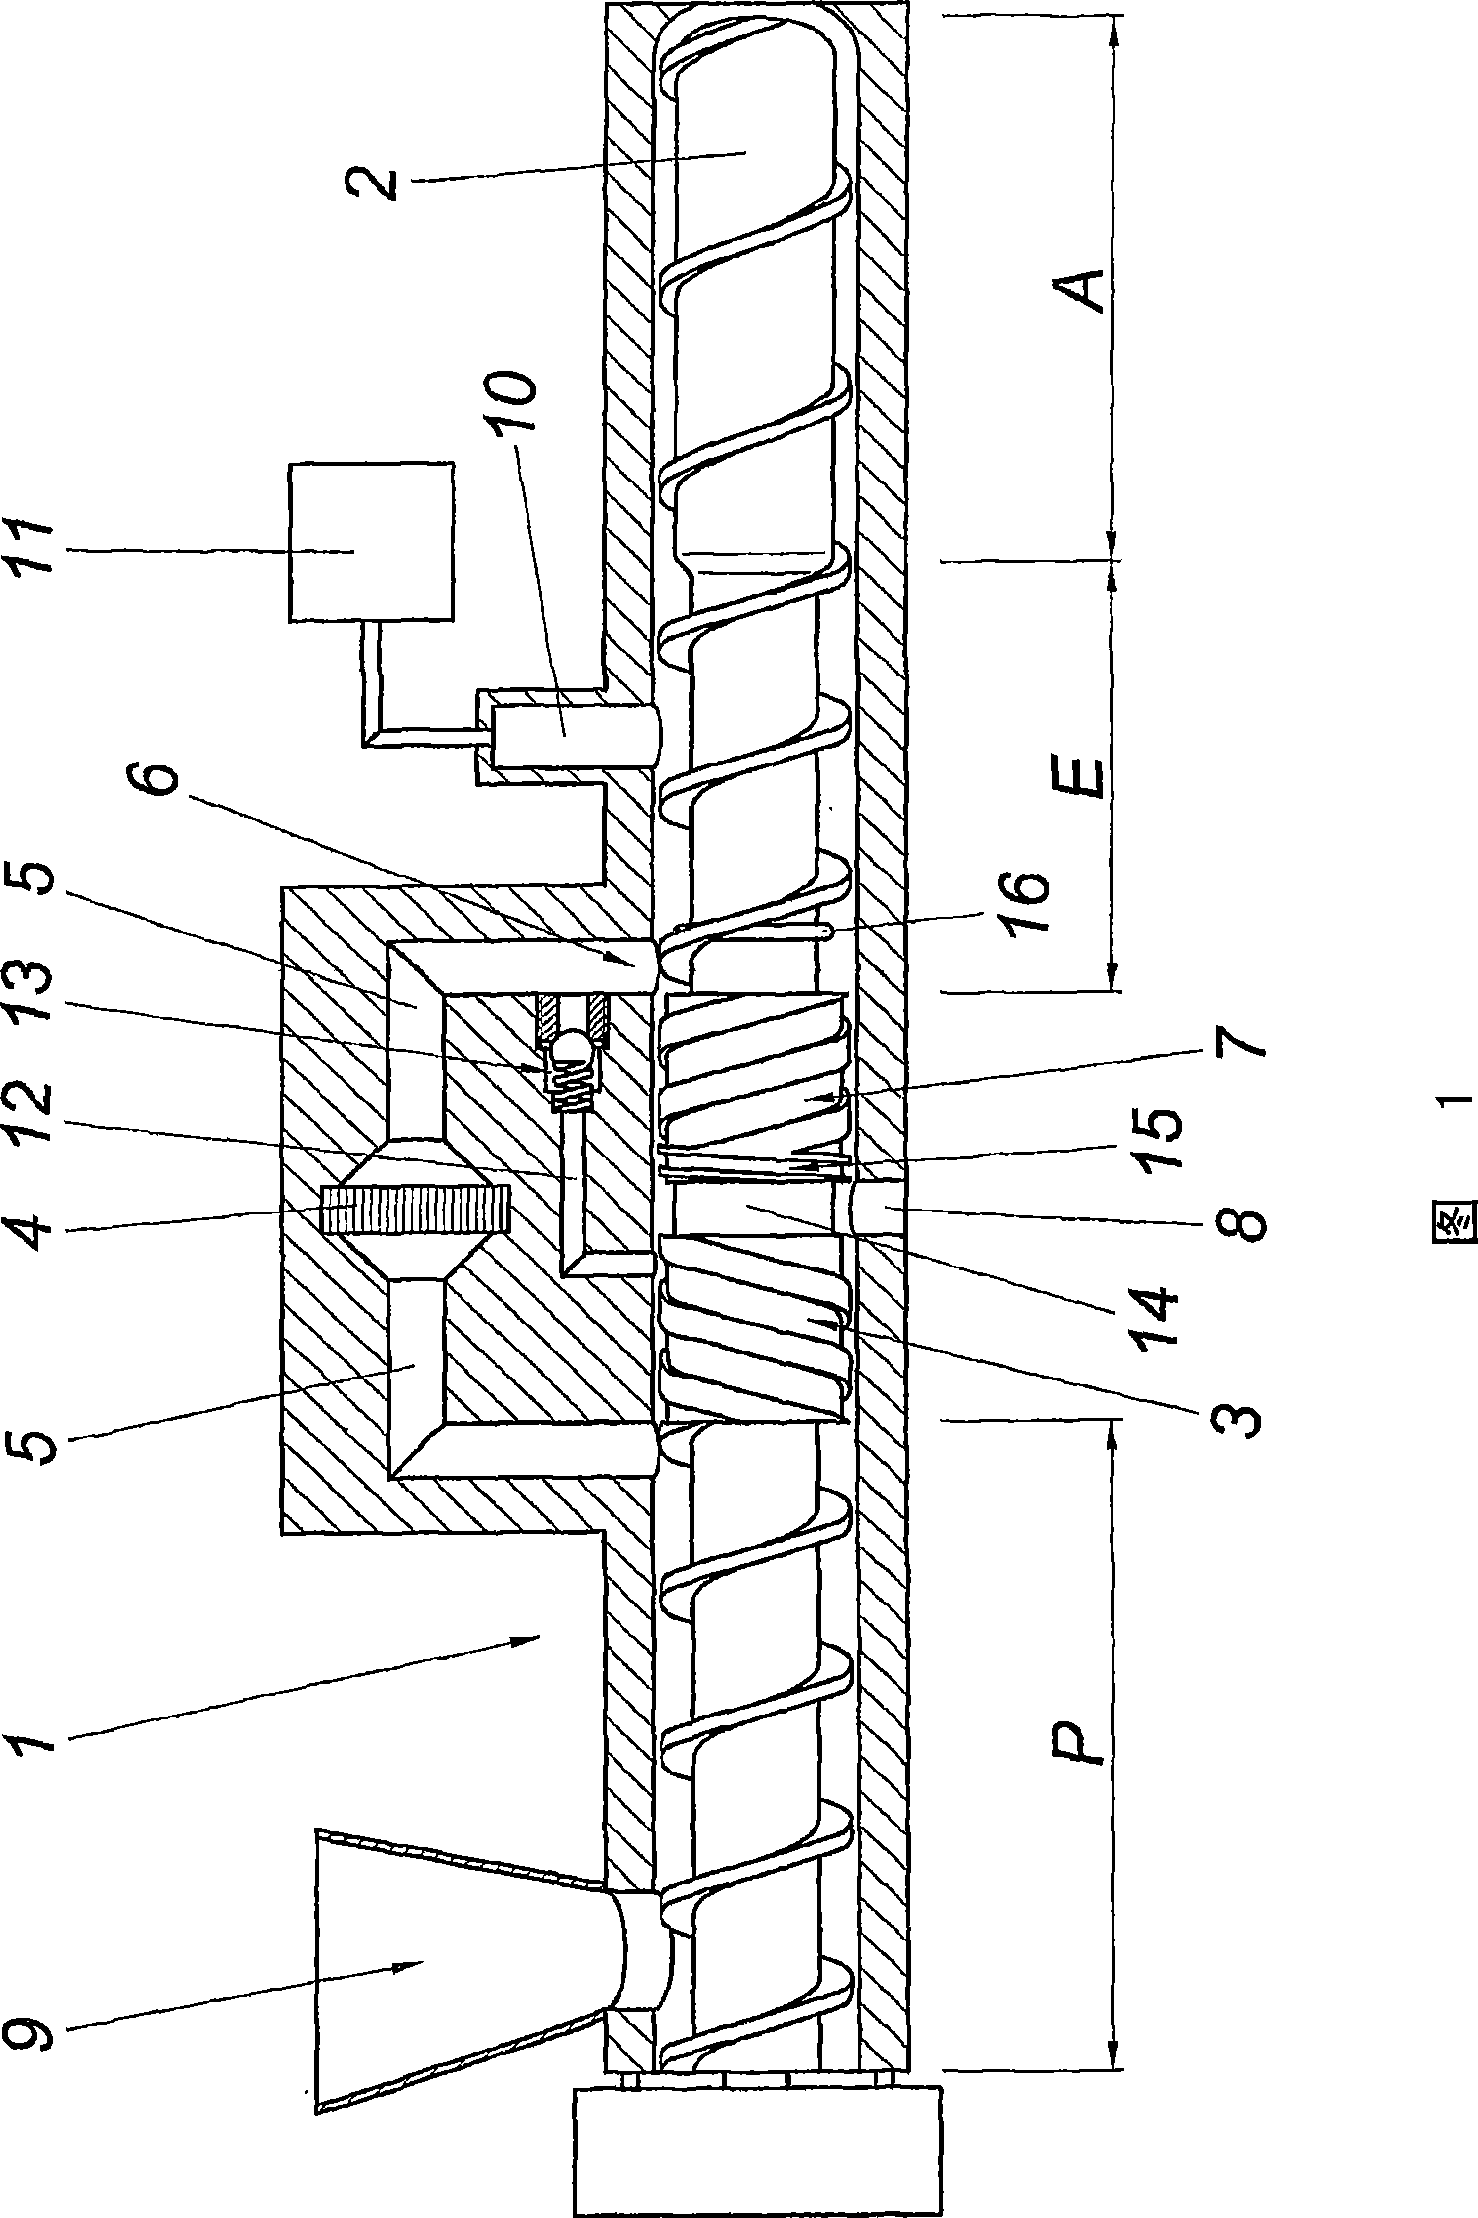 Device for degassing and filtering plastic melts